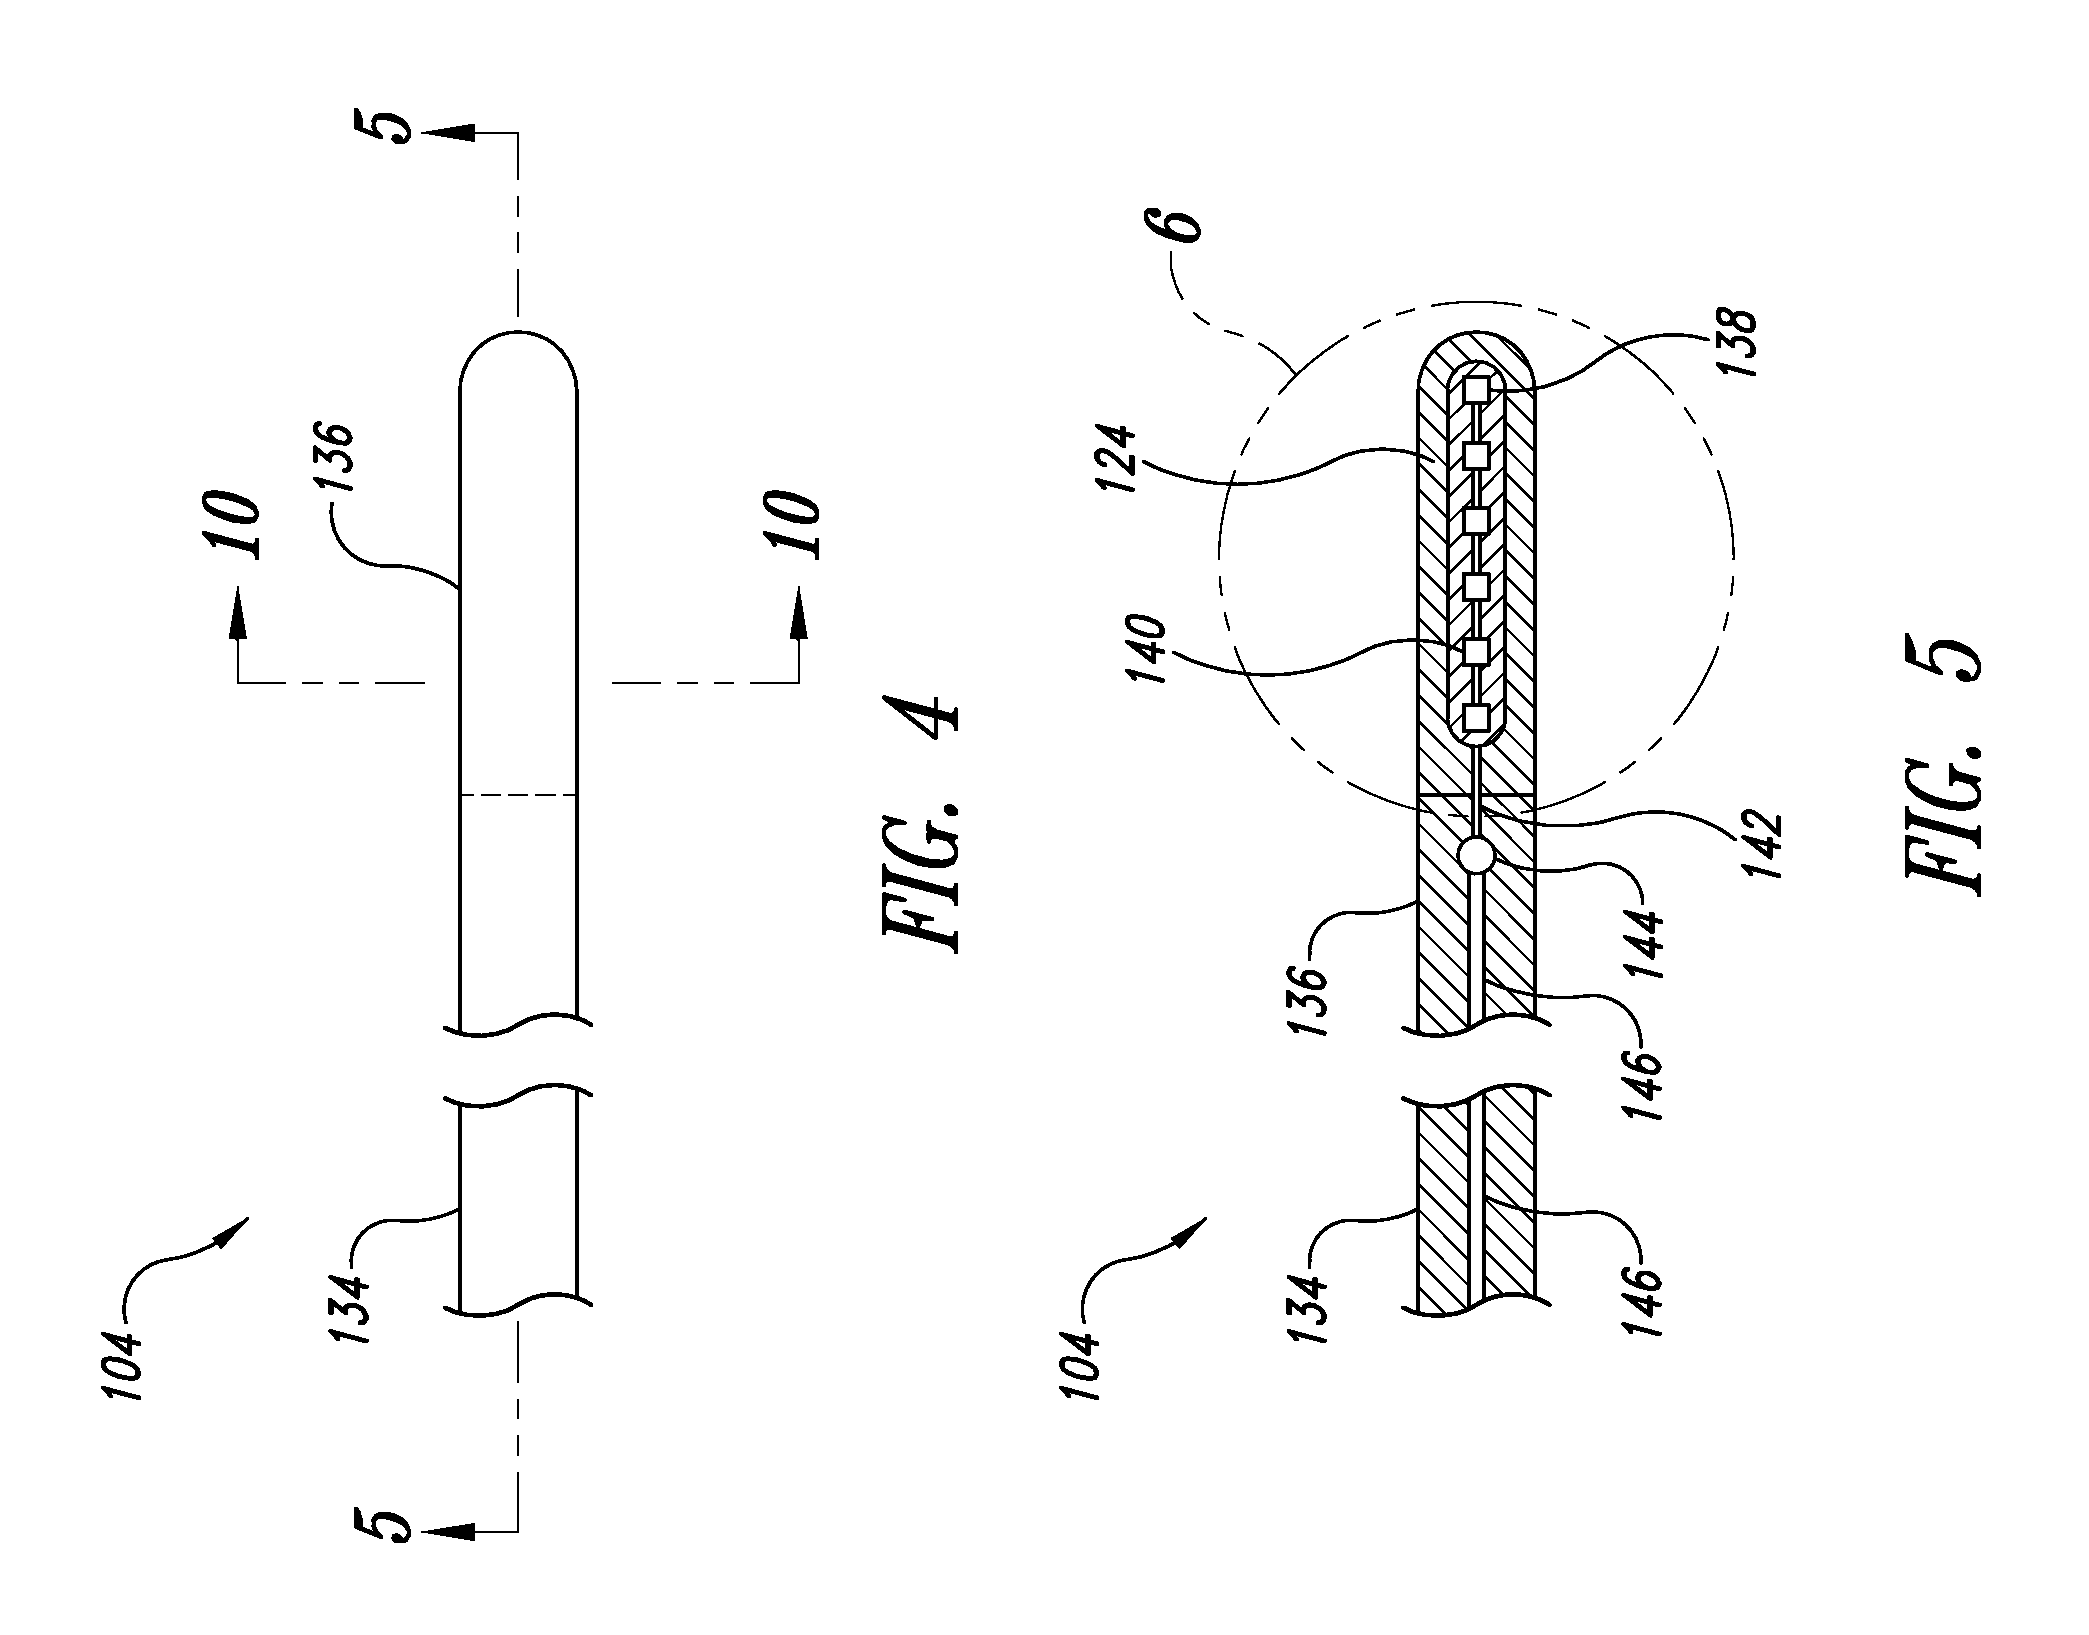 Light transmission system for photoreactive therapy